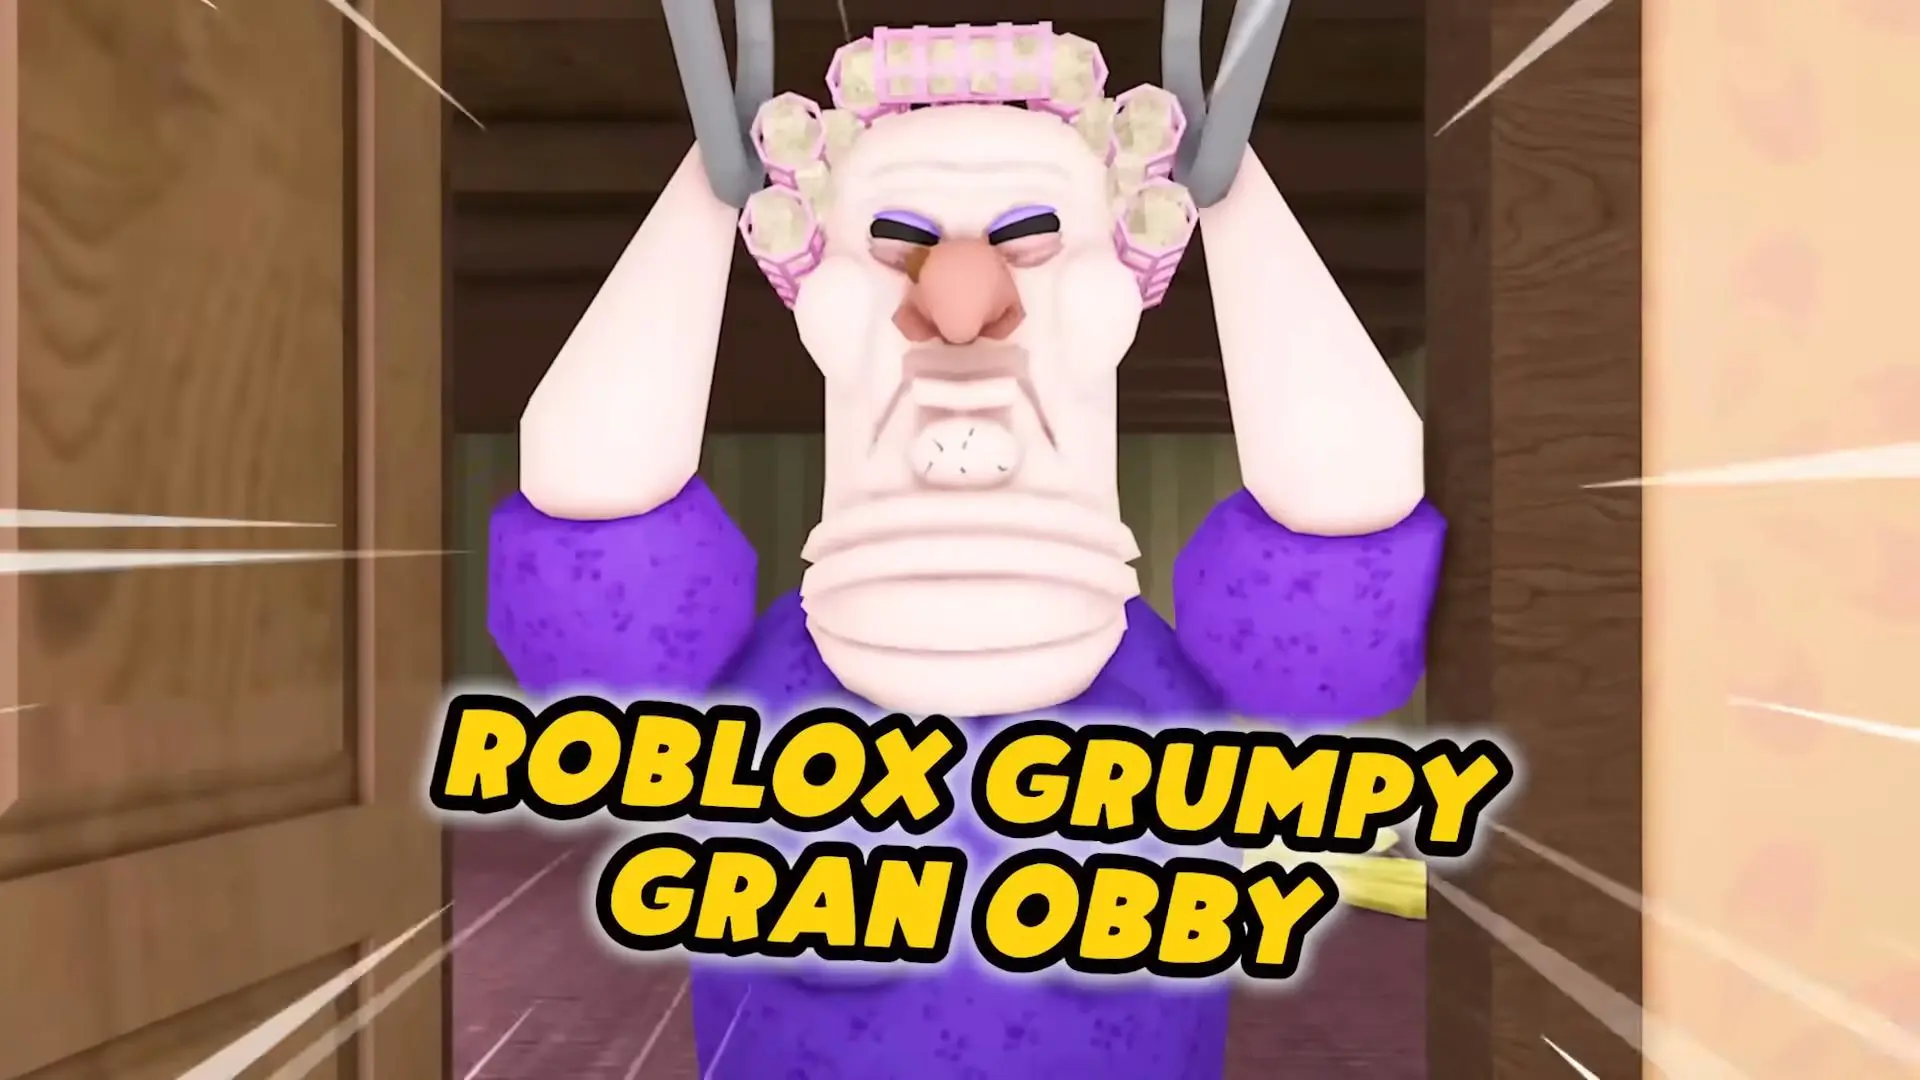 Download Scary grumpy granny obby room android on PC